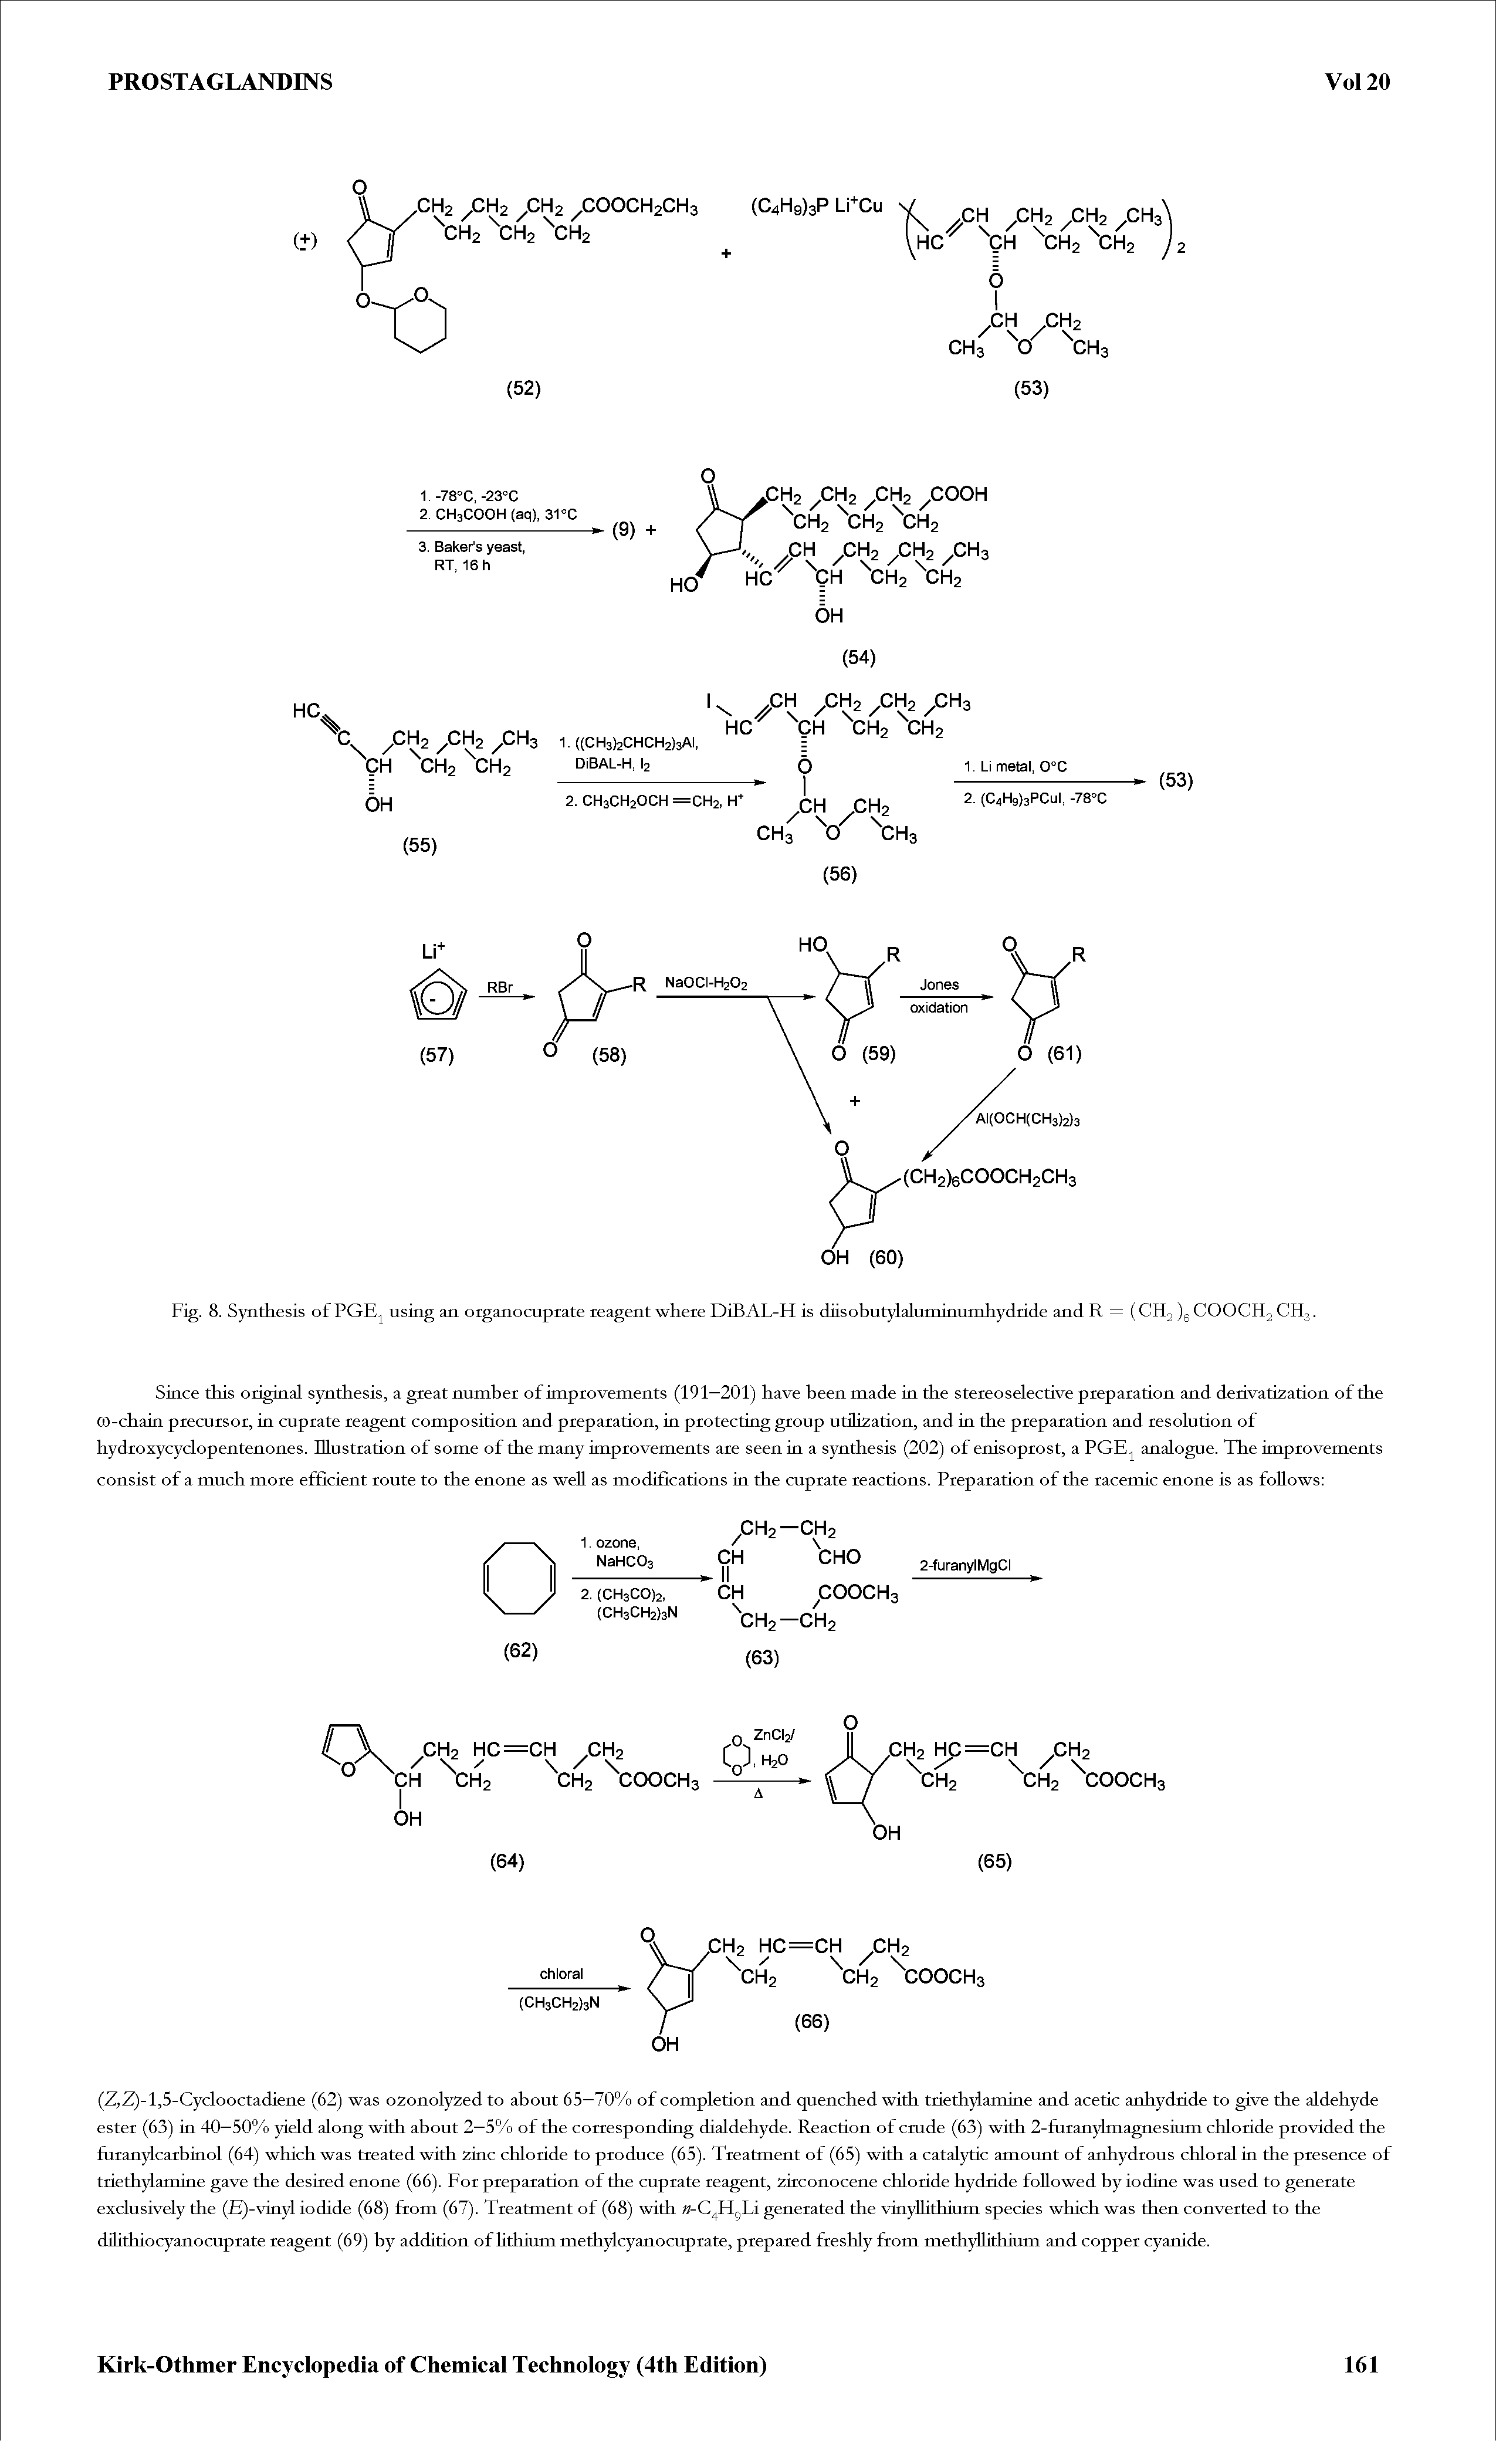 Fig. 8. Synthesis of PGE using an organocuprate reagent where DiBAL-H is diisobutylalurninurnhydride and R = (CH2 )g COOCH2 CH3.